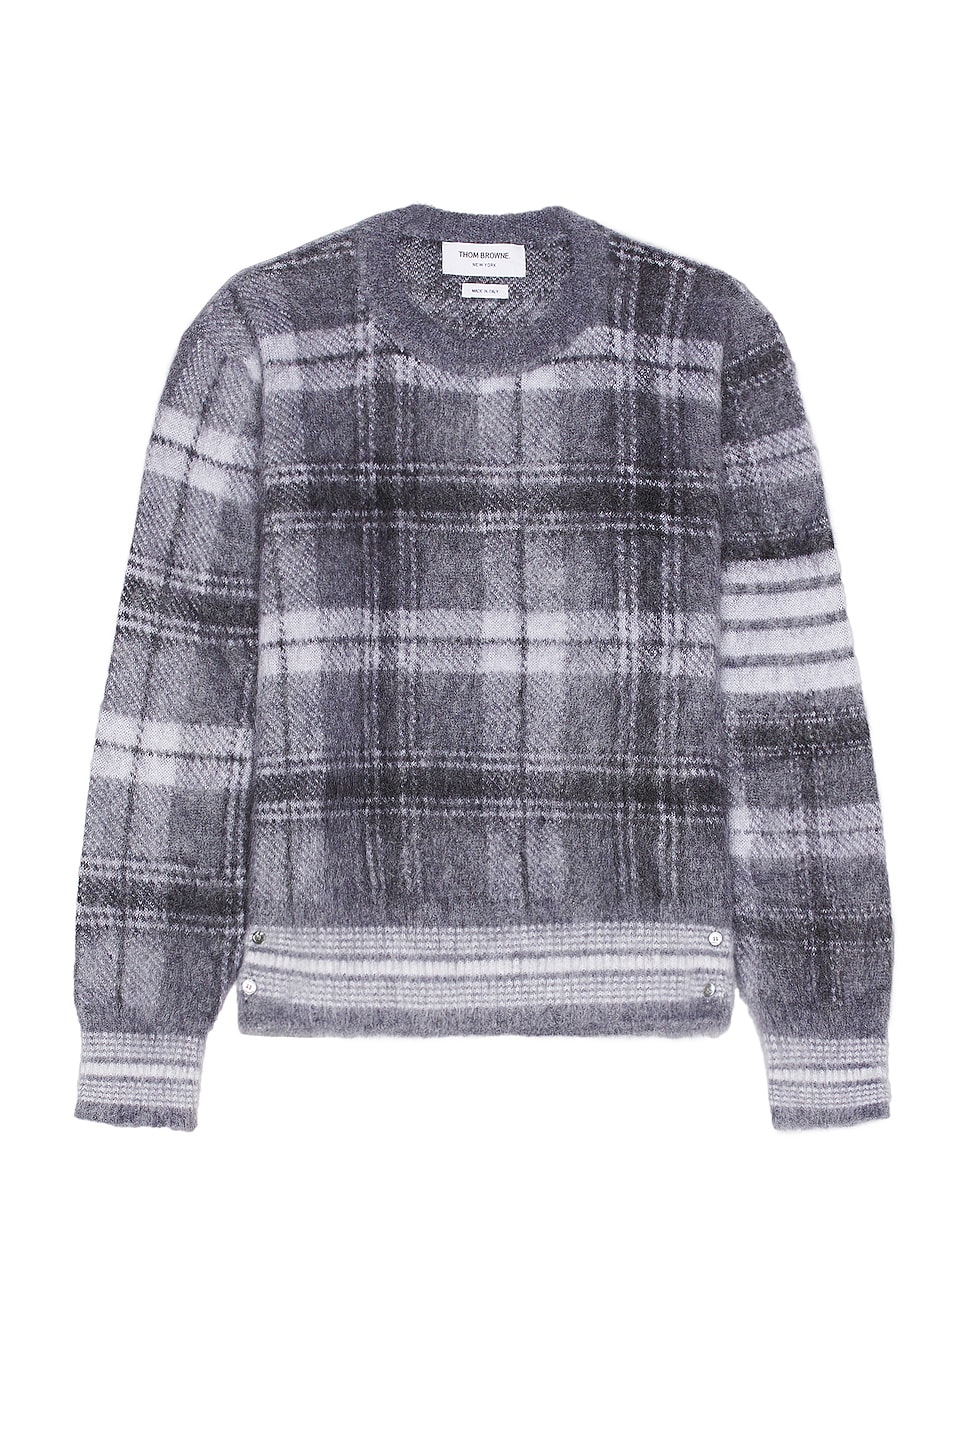 Image 1 of Thom Browne Tartan Check Jacquard Relaxed Fit Sweater in Medium Grey